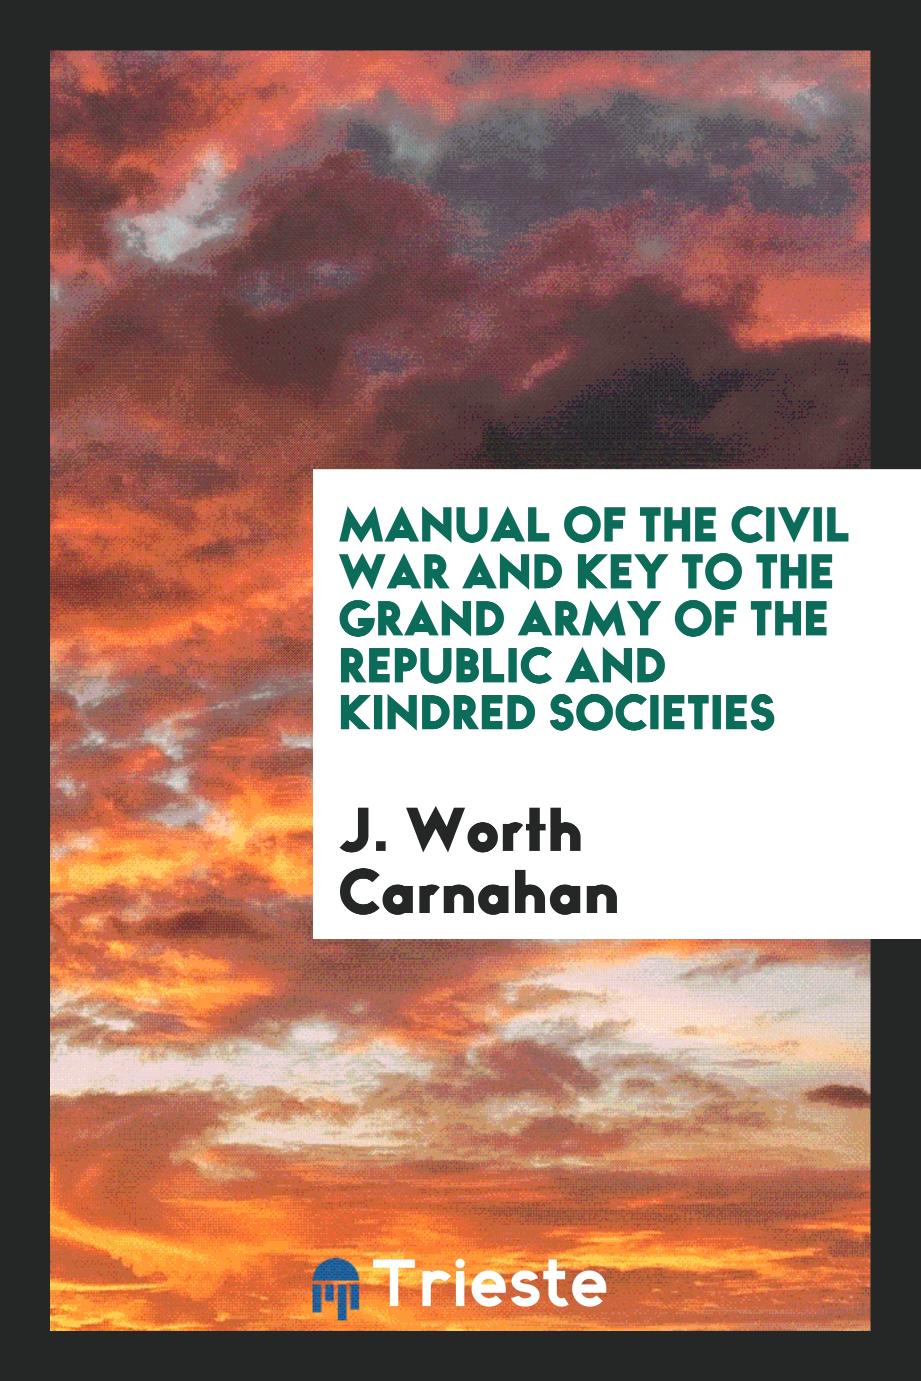 Manual of the Civil War and key to the Grand Army of the Republic and kindred societies